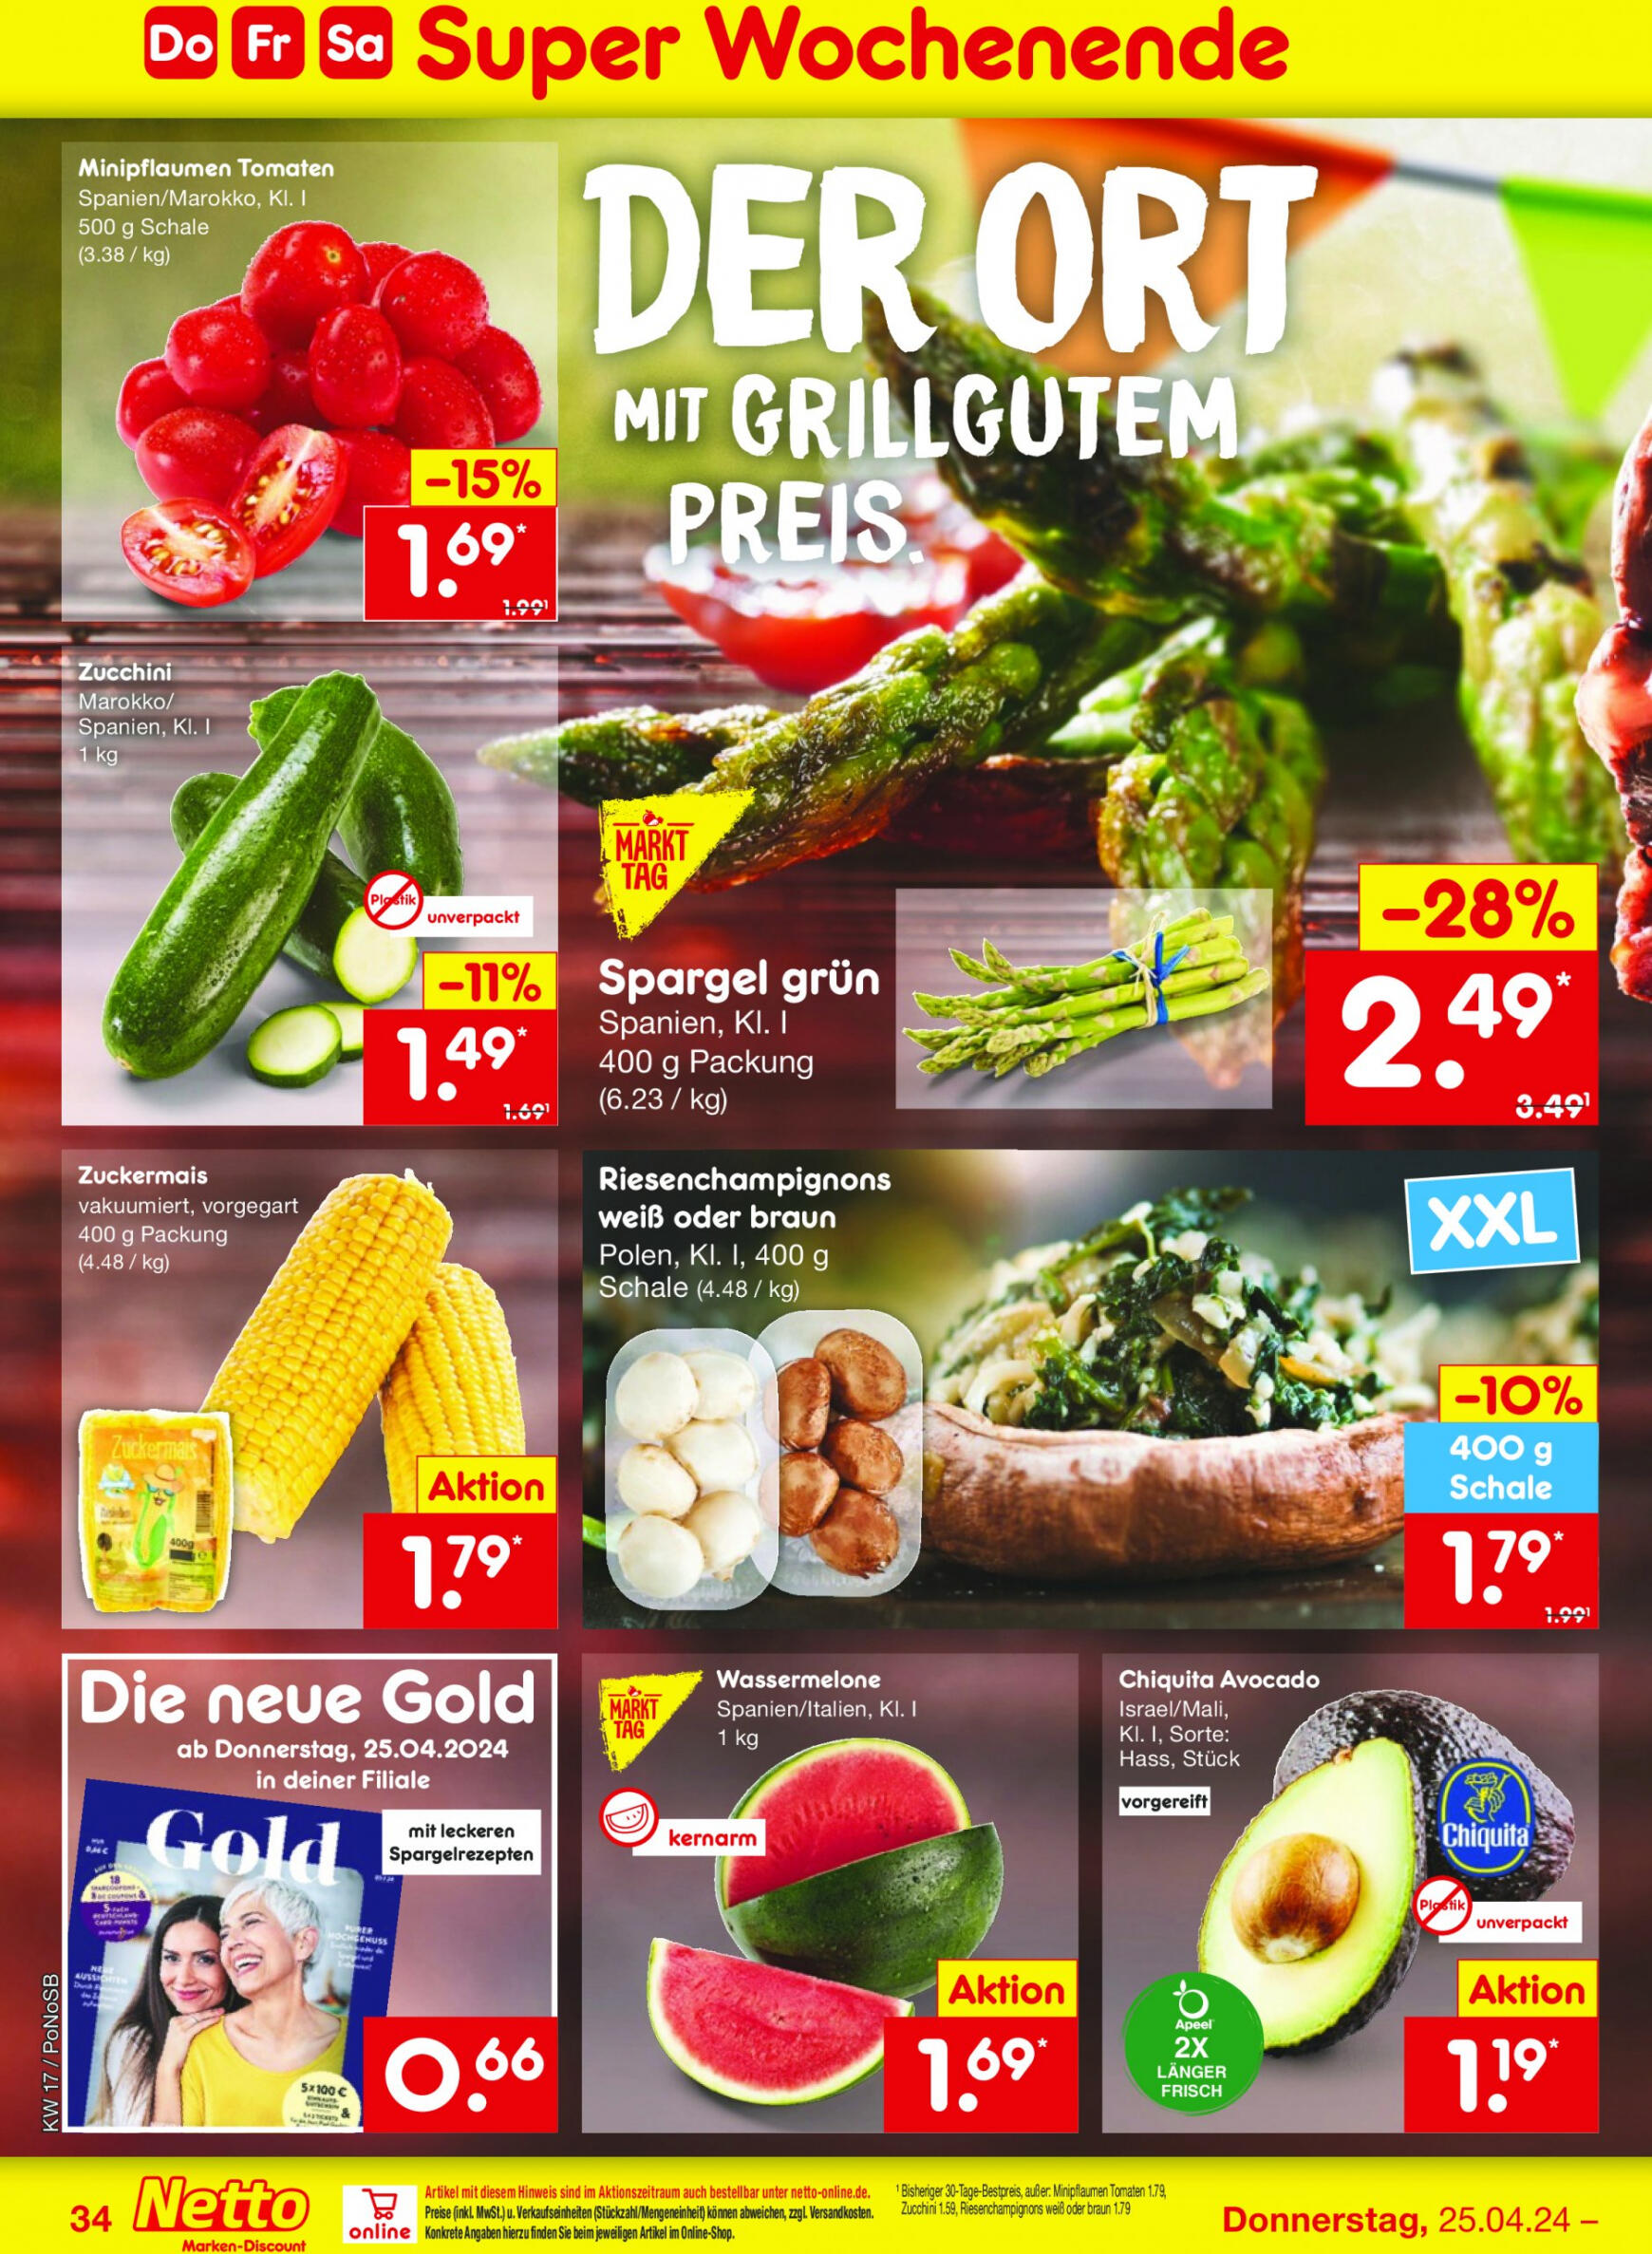 netto - Flyer Netto aktuell 22.04. - 27.04. - page: 40